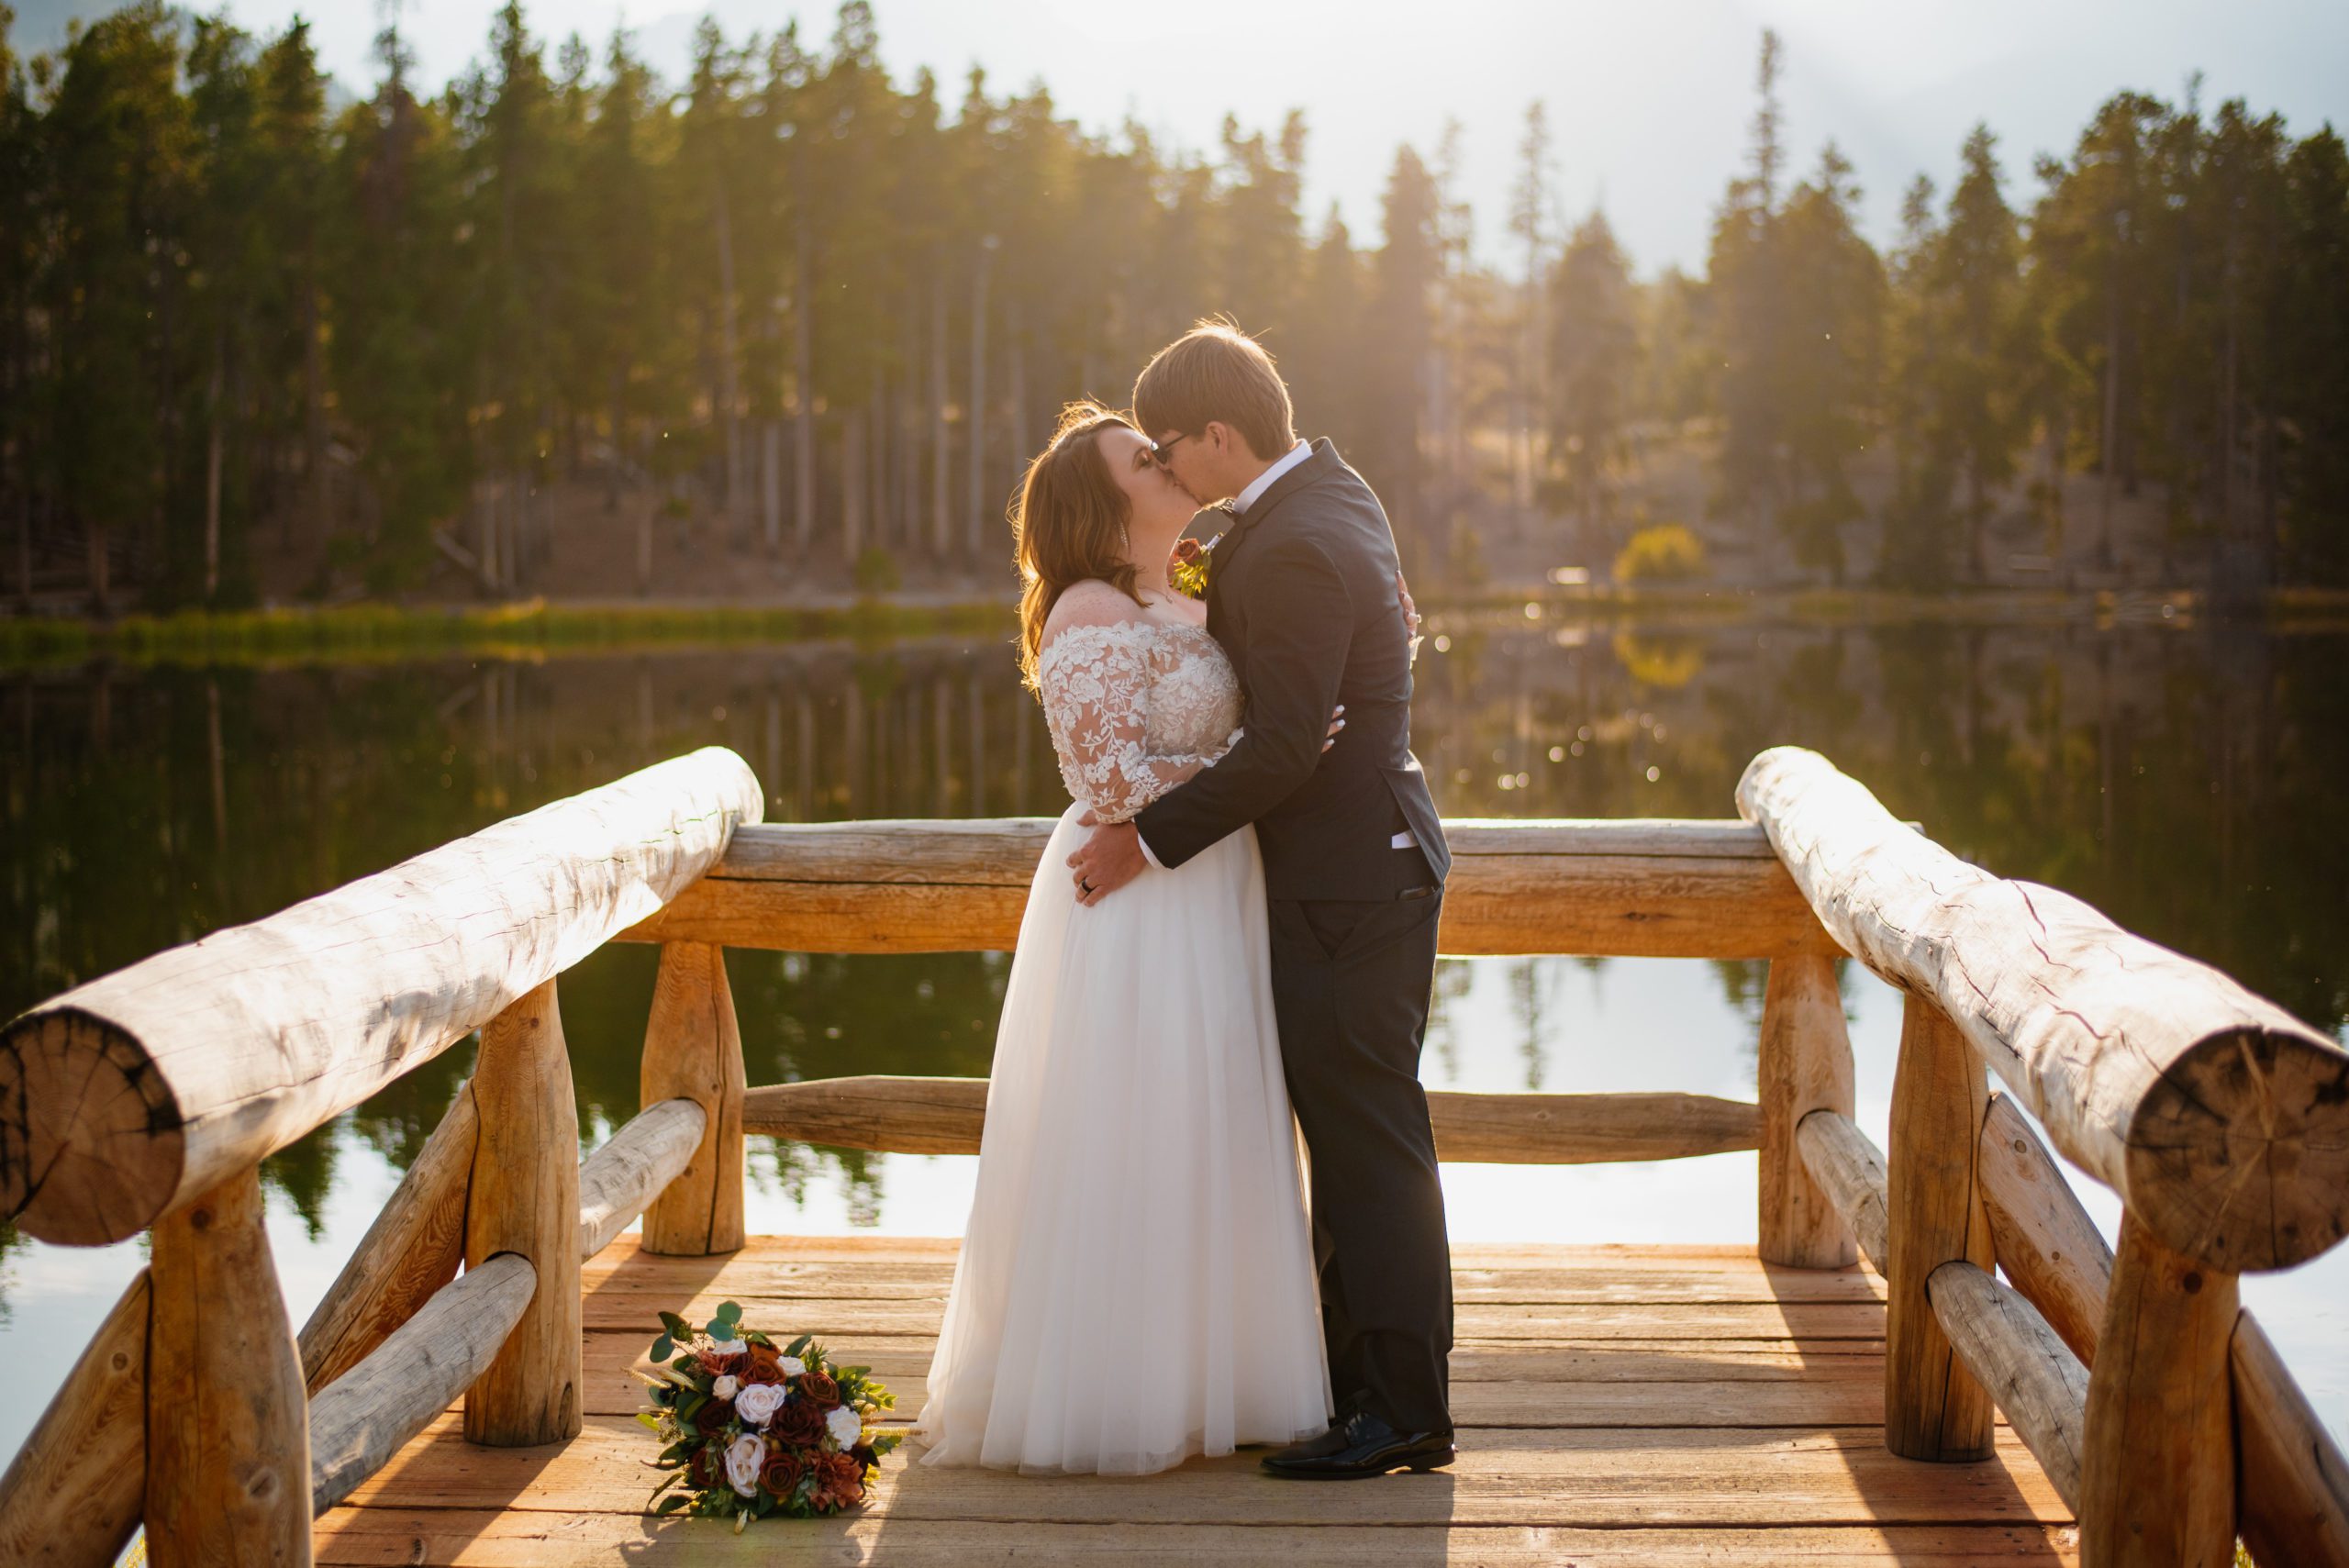 Their first kiss as husband and wife! at Sprague Lake - RMNP